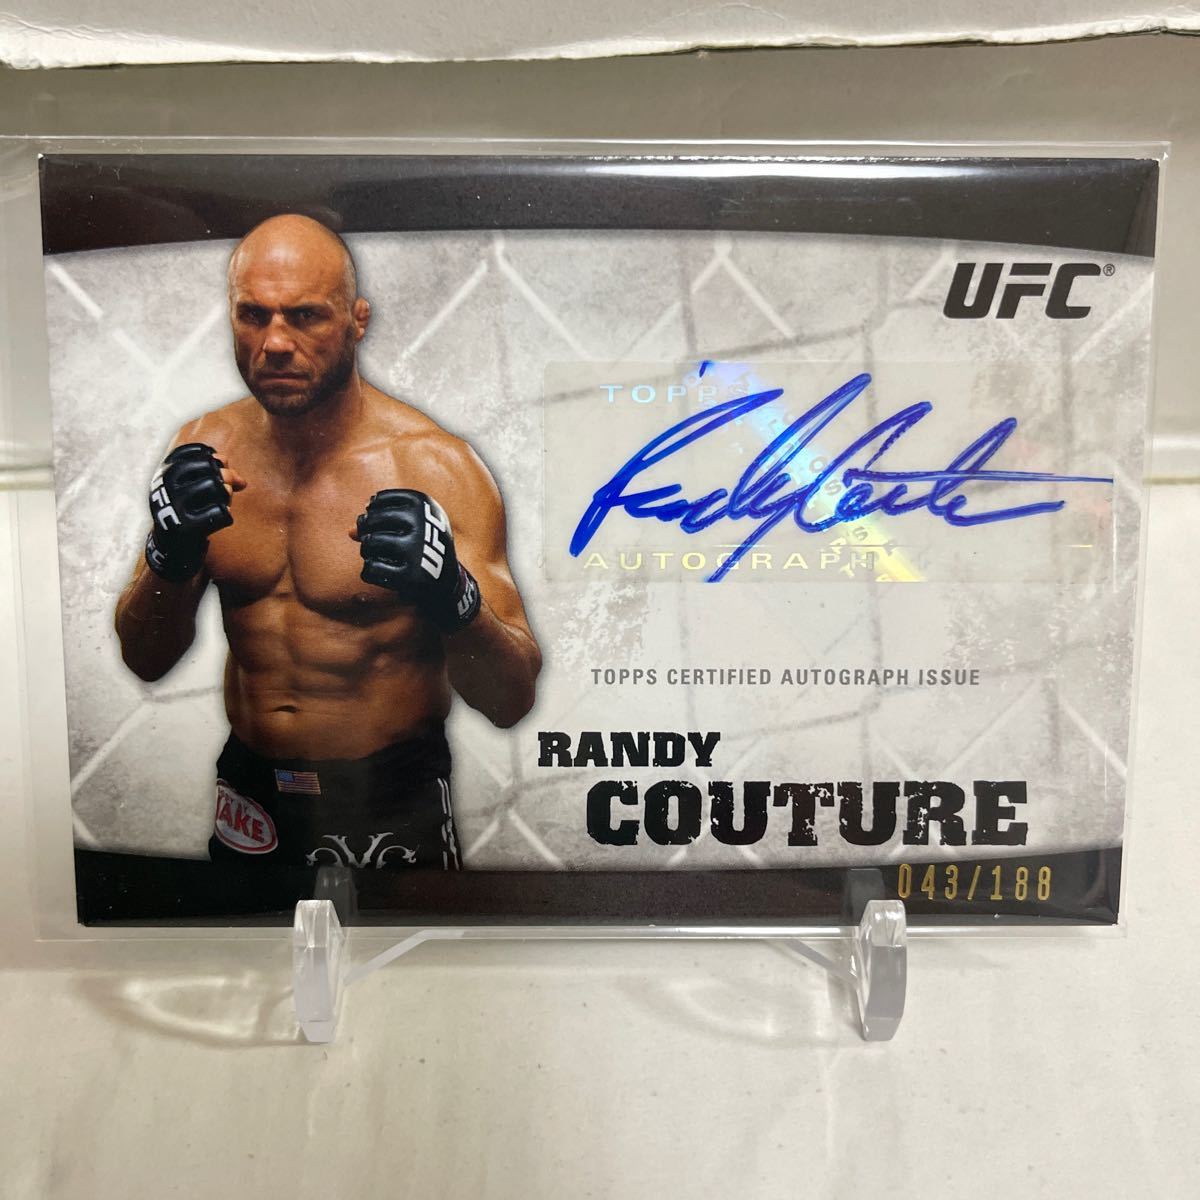 2010 TOPPS UFC Knockout RANDY COUTURE AUTO 188枚限定　043/188 直筆サイン　元UFCヘビー級、ライトヘビー級王者　ランディ・クートゥア_画像1